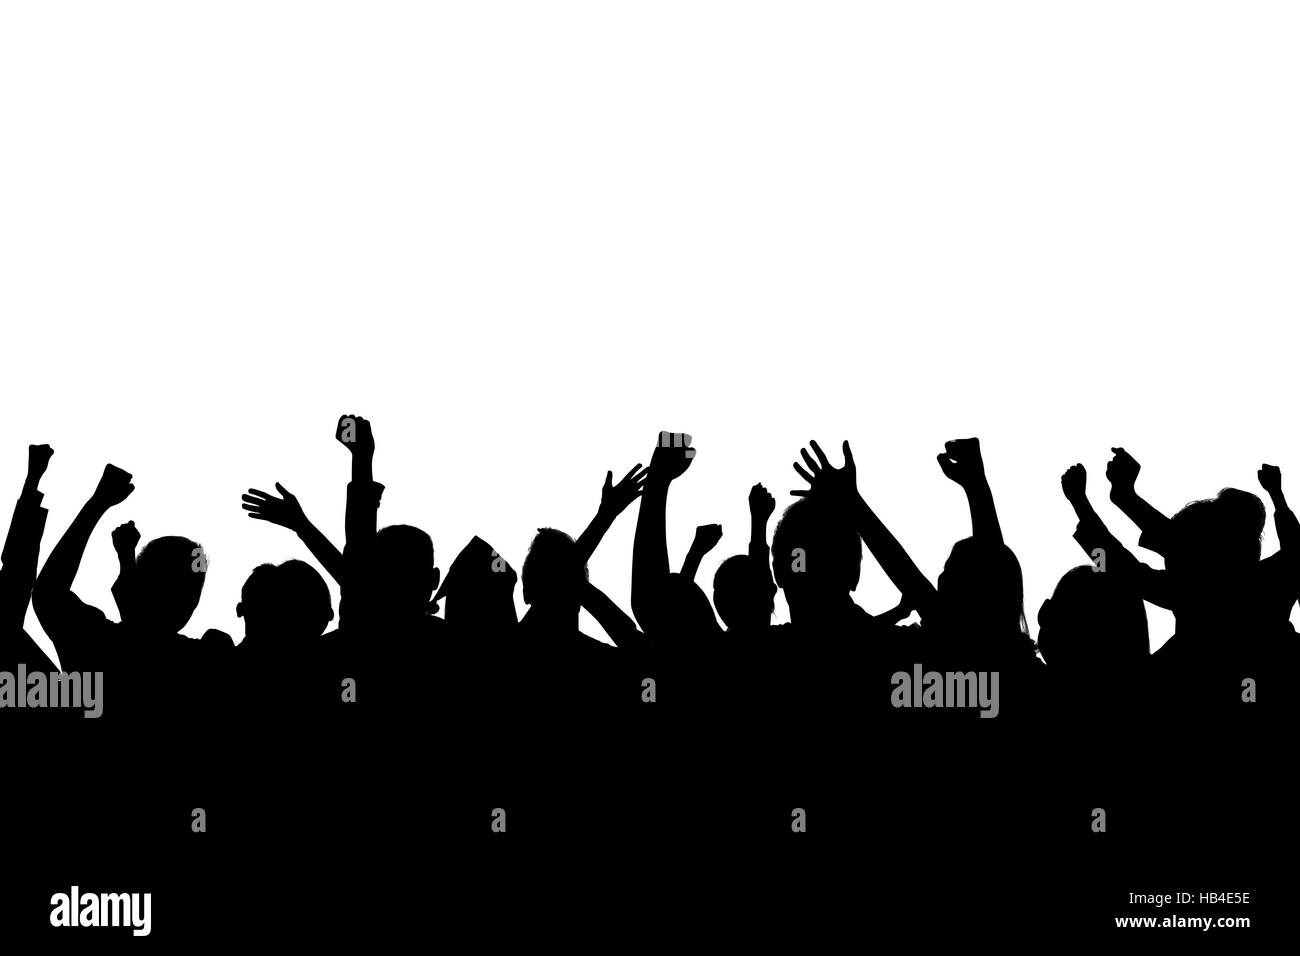 Image of silhouette people party isolated over white background Stock ...